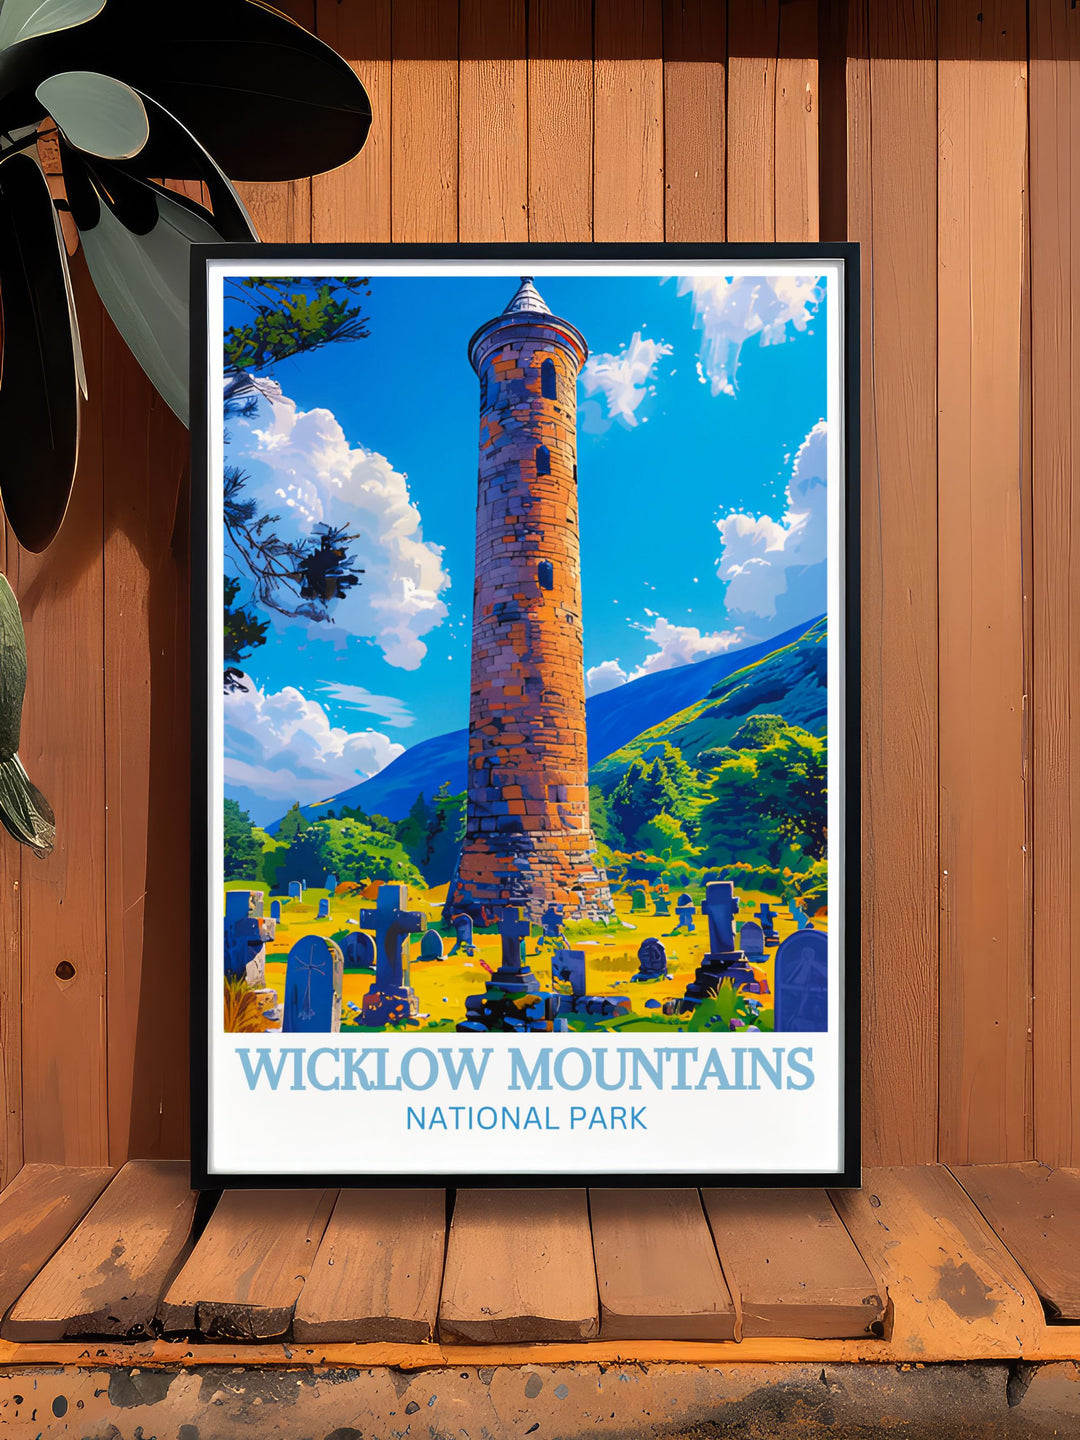 Celebrate the charm of Wicklow Mountains with this vintage poster. Featuring the parks diverse landscapes and historic sites, this artwork evokes the timeless appeal of Irelands natural beauty and cultural heritage.